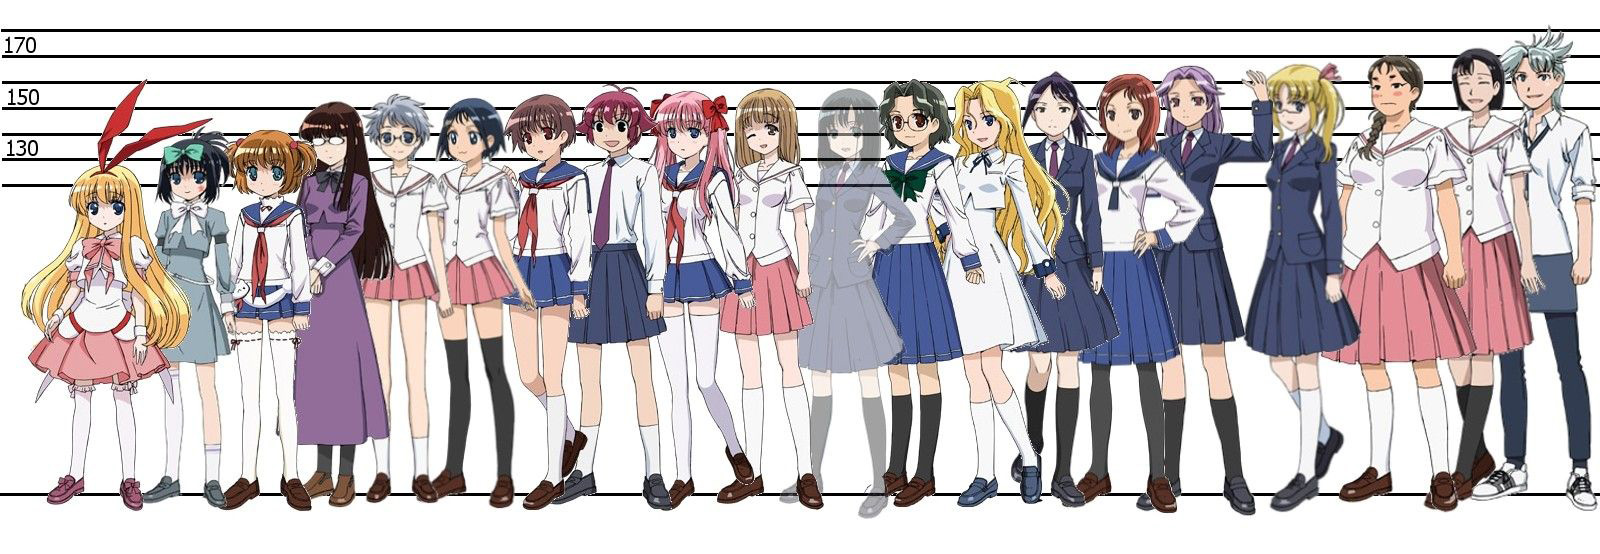 Old-School-Female-Anime-Characters-Height-Comparison-Chart.